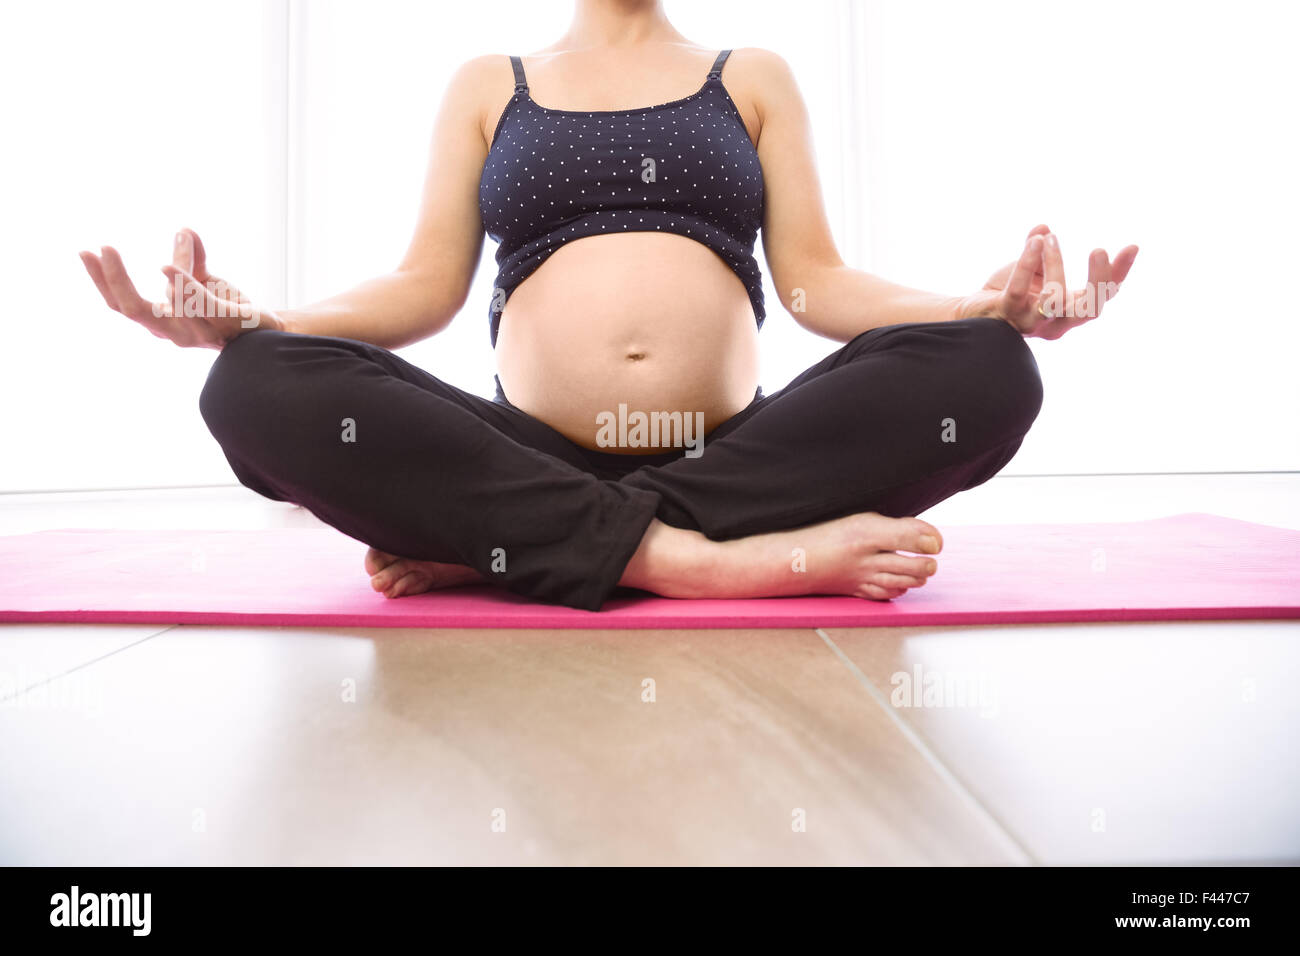 Pregnant woman keeping in shape Stock Photo